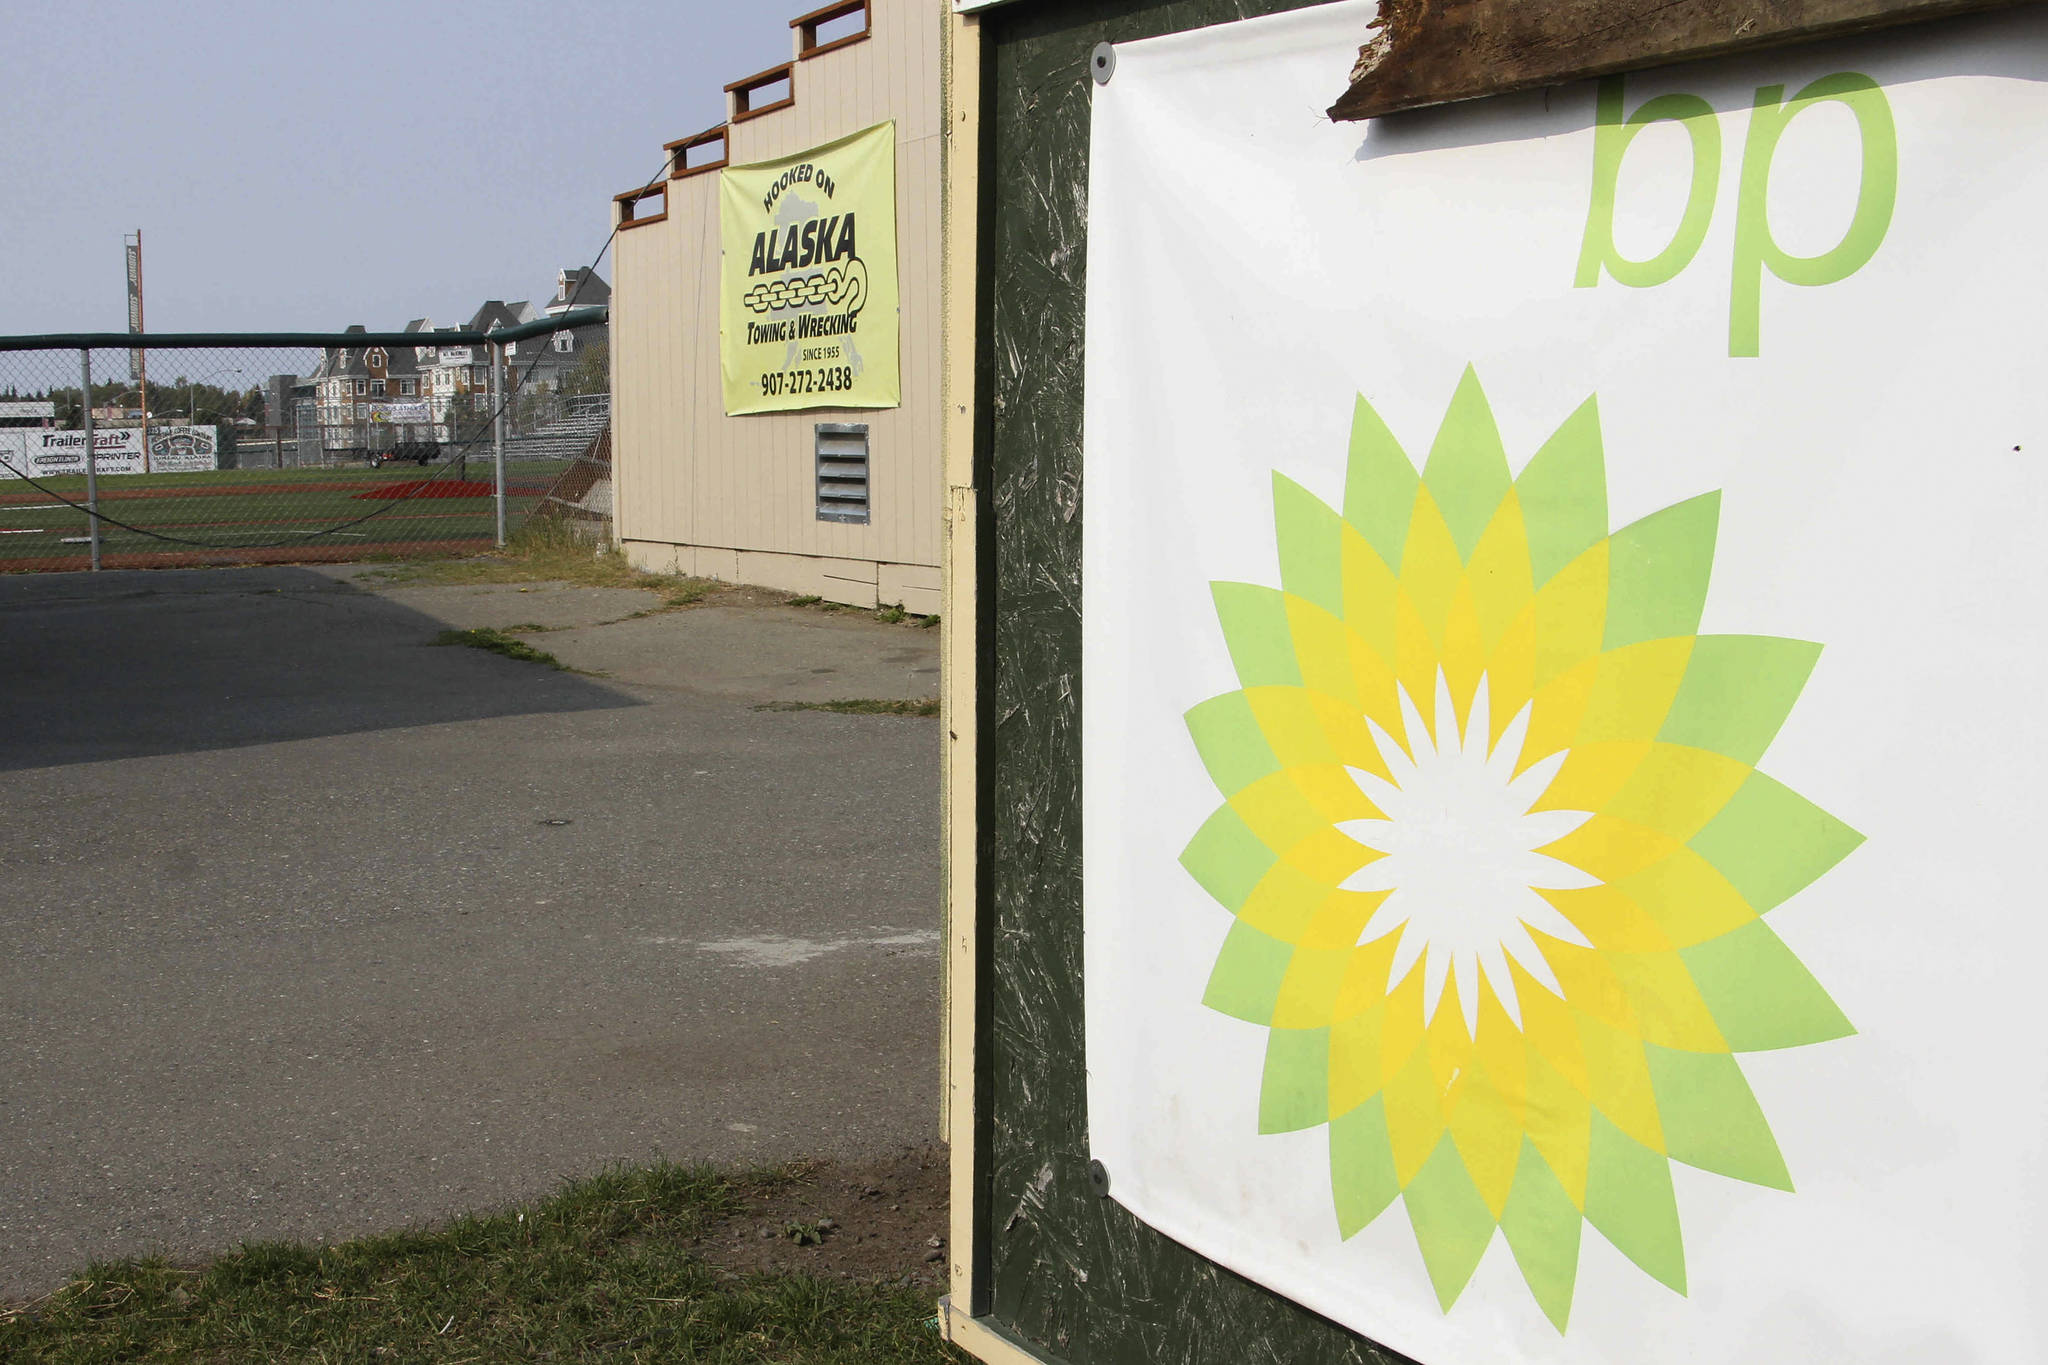 A BP sponsorship sign is shown at Mulcahy Stadium in Anchorage, Alaska, Wednesday, Aug. 28, 2019. BP announced plans Aug. 27, 2019, to sell its Alaska assets to Hilcorp, and its plan to pull out of Alaska could leave a big hole for nonprofits and other programs that benefited from the oil giant’s donations and its employee volunteers. (AP Photo/Mark Thiessen)